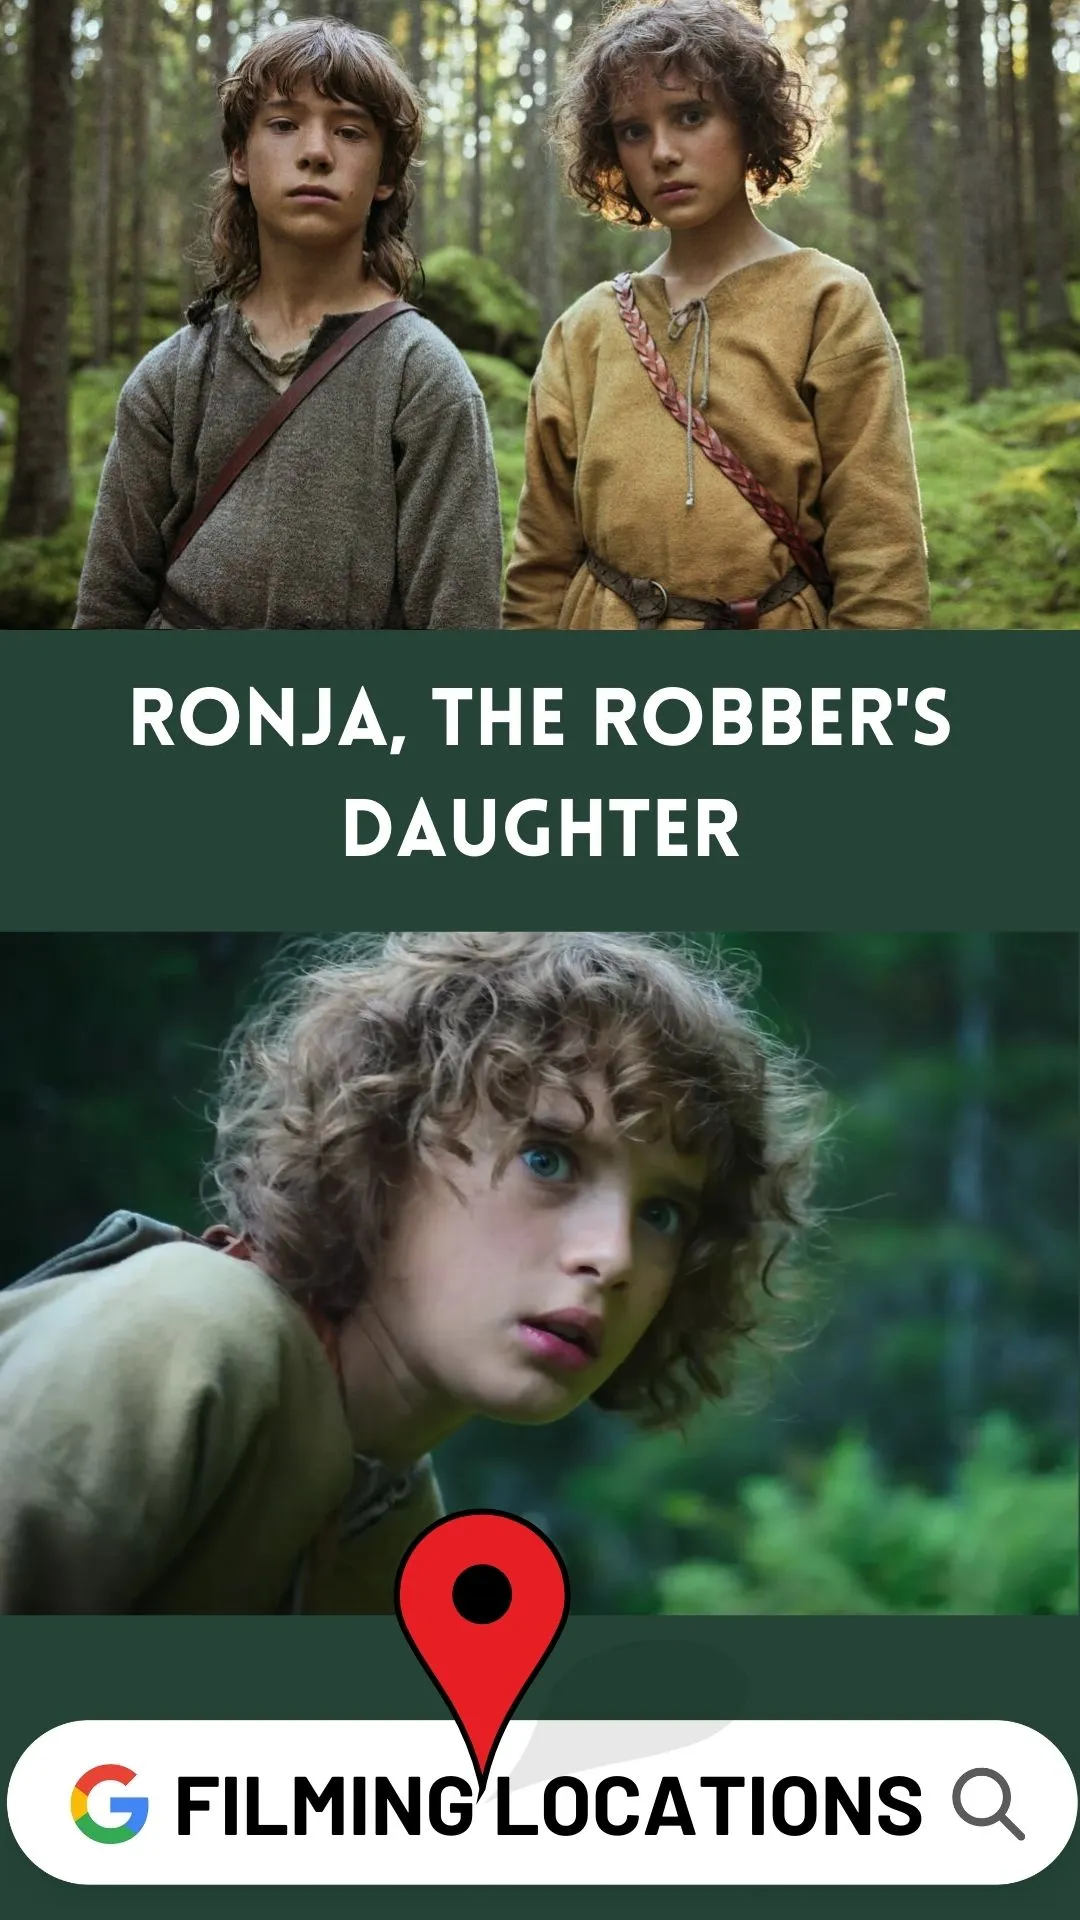 Where Is Ronja the Robber's Daughter Filmed